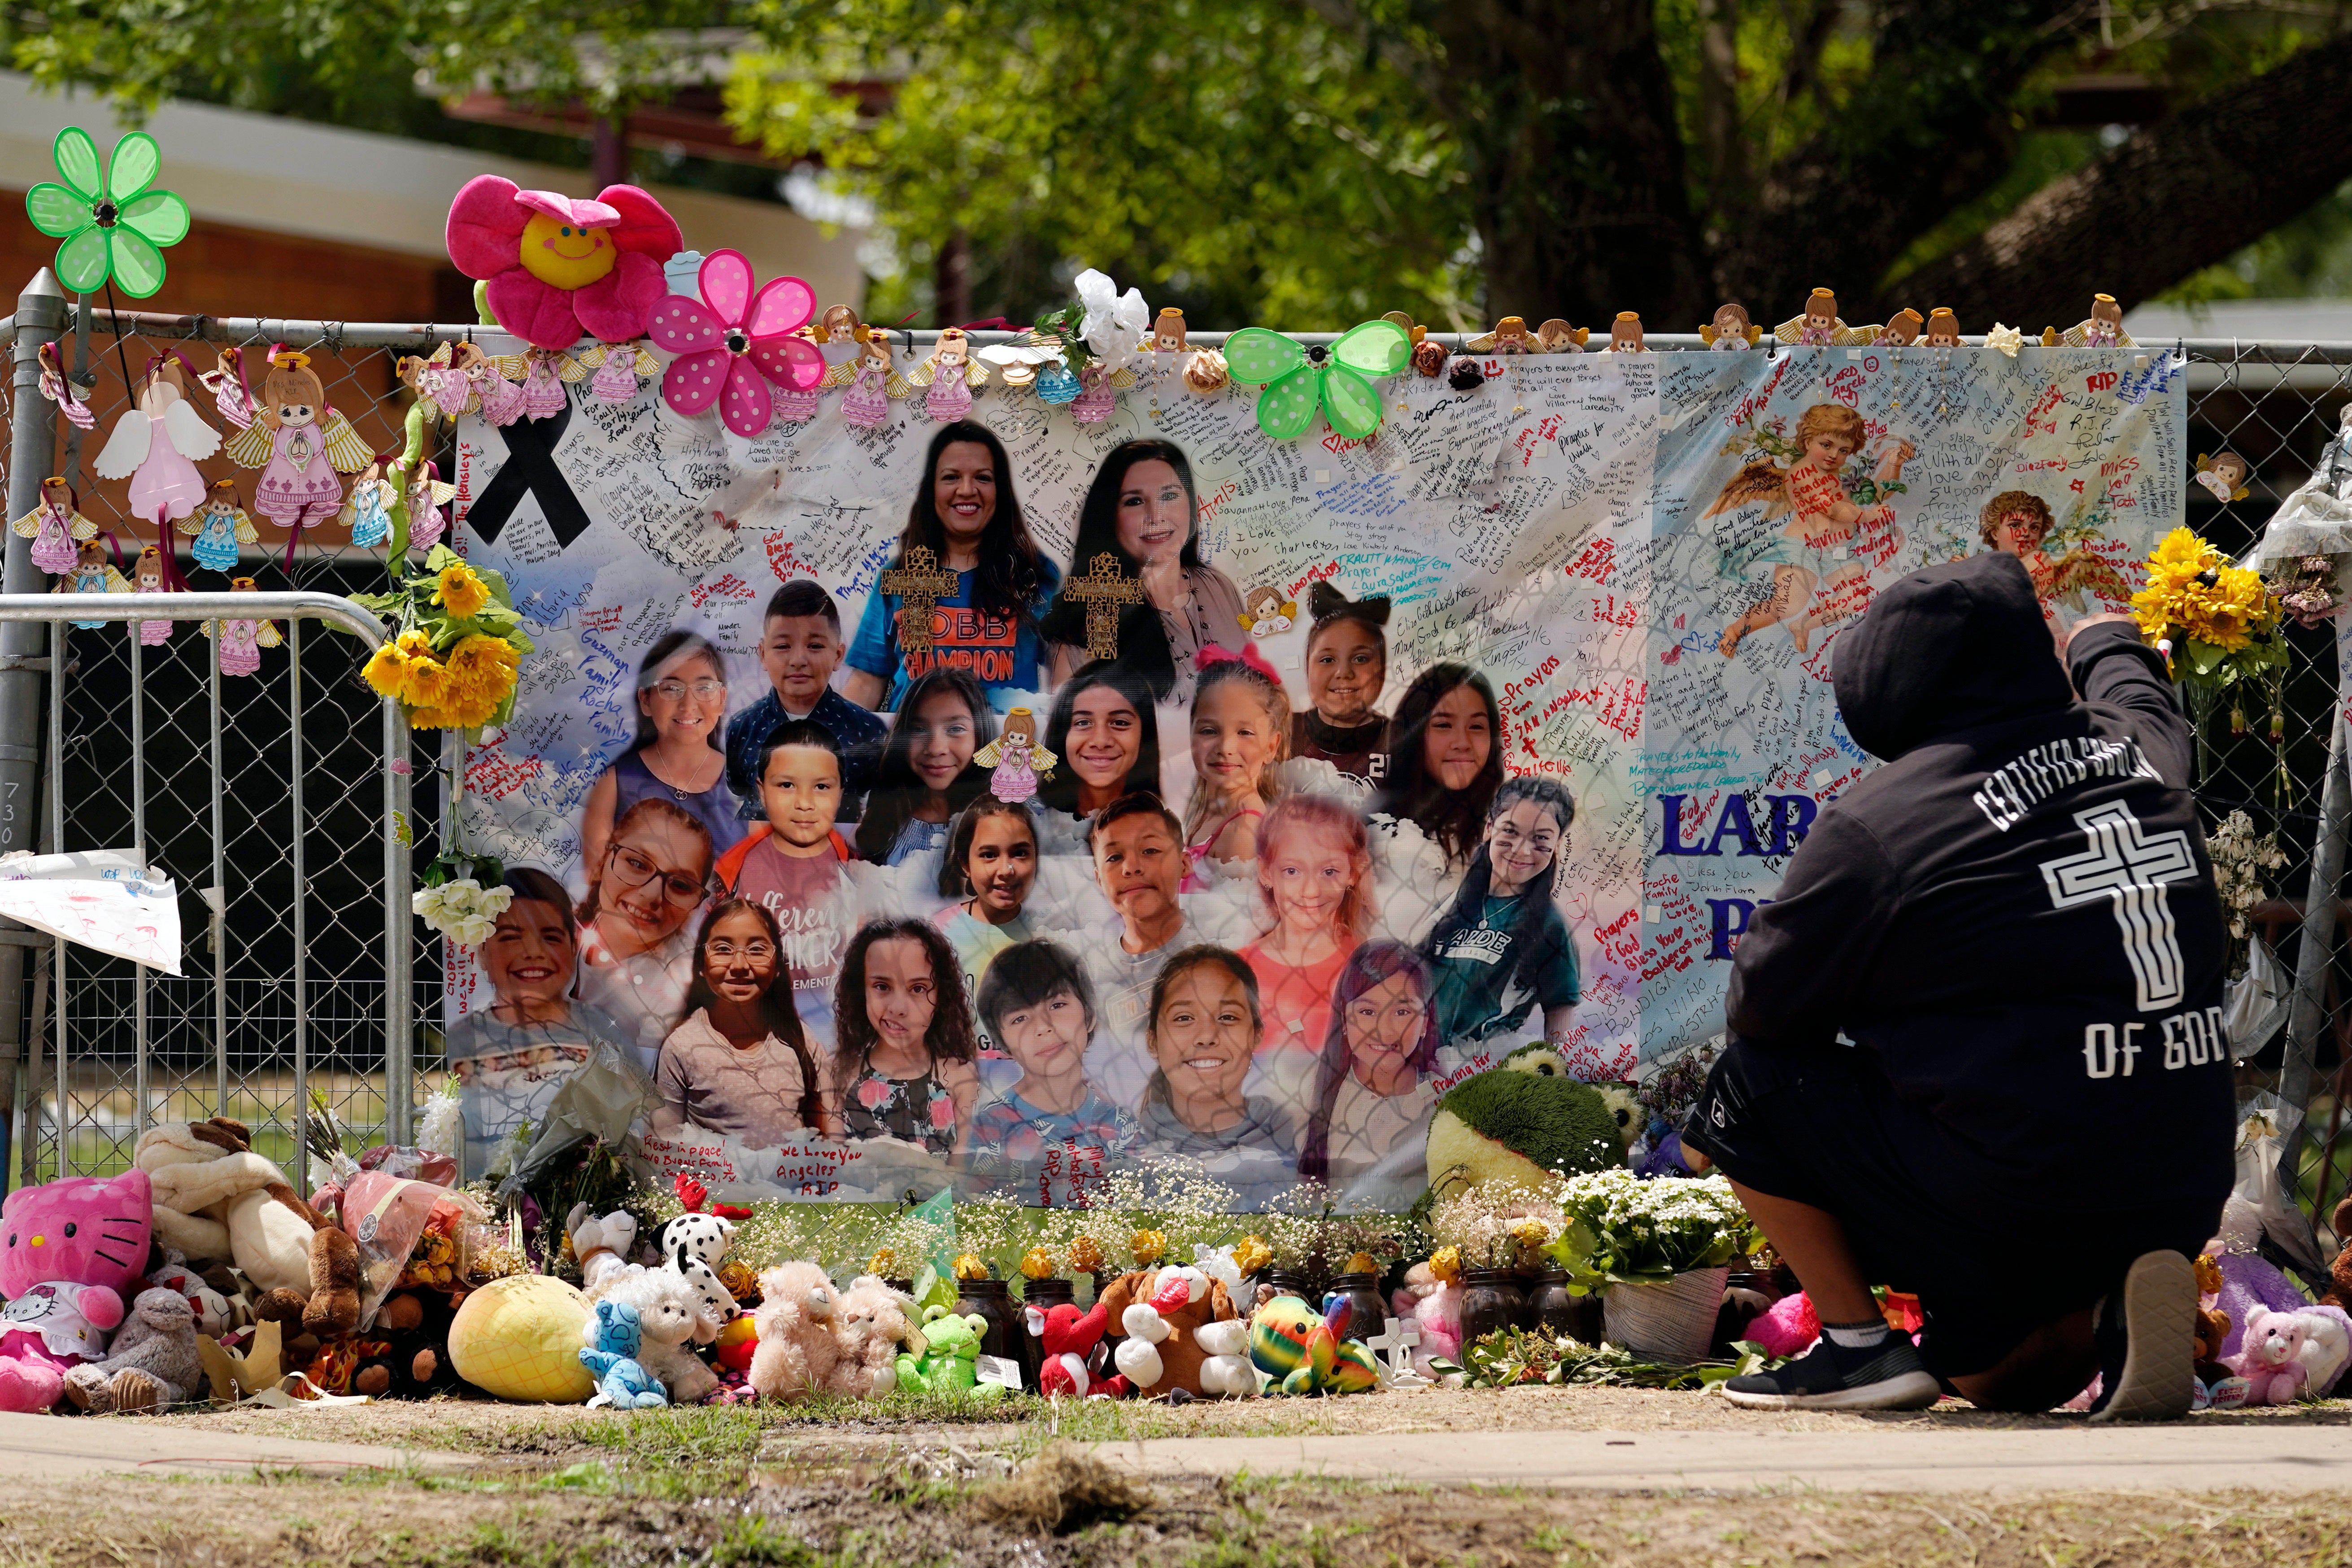 A memorial outside Robb Elementary School in honour of the 21 victims killed in the mass shooting